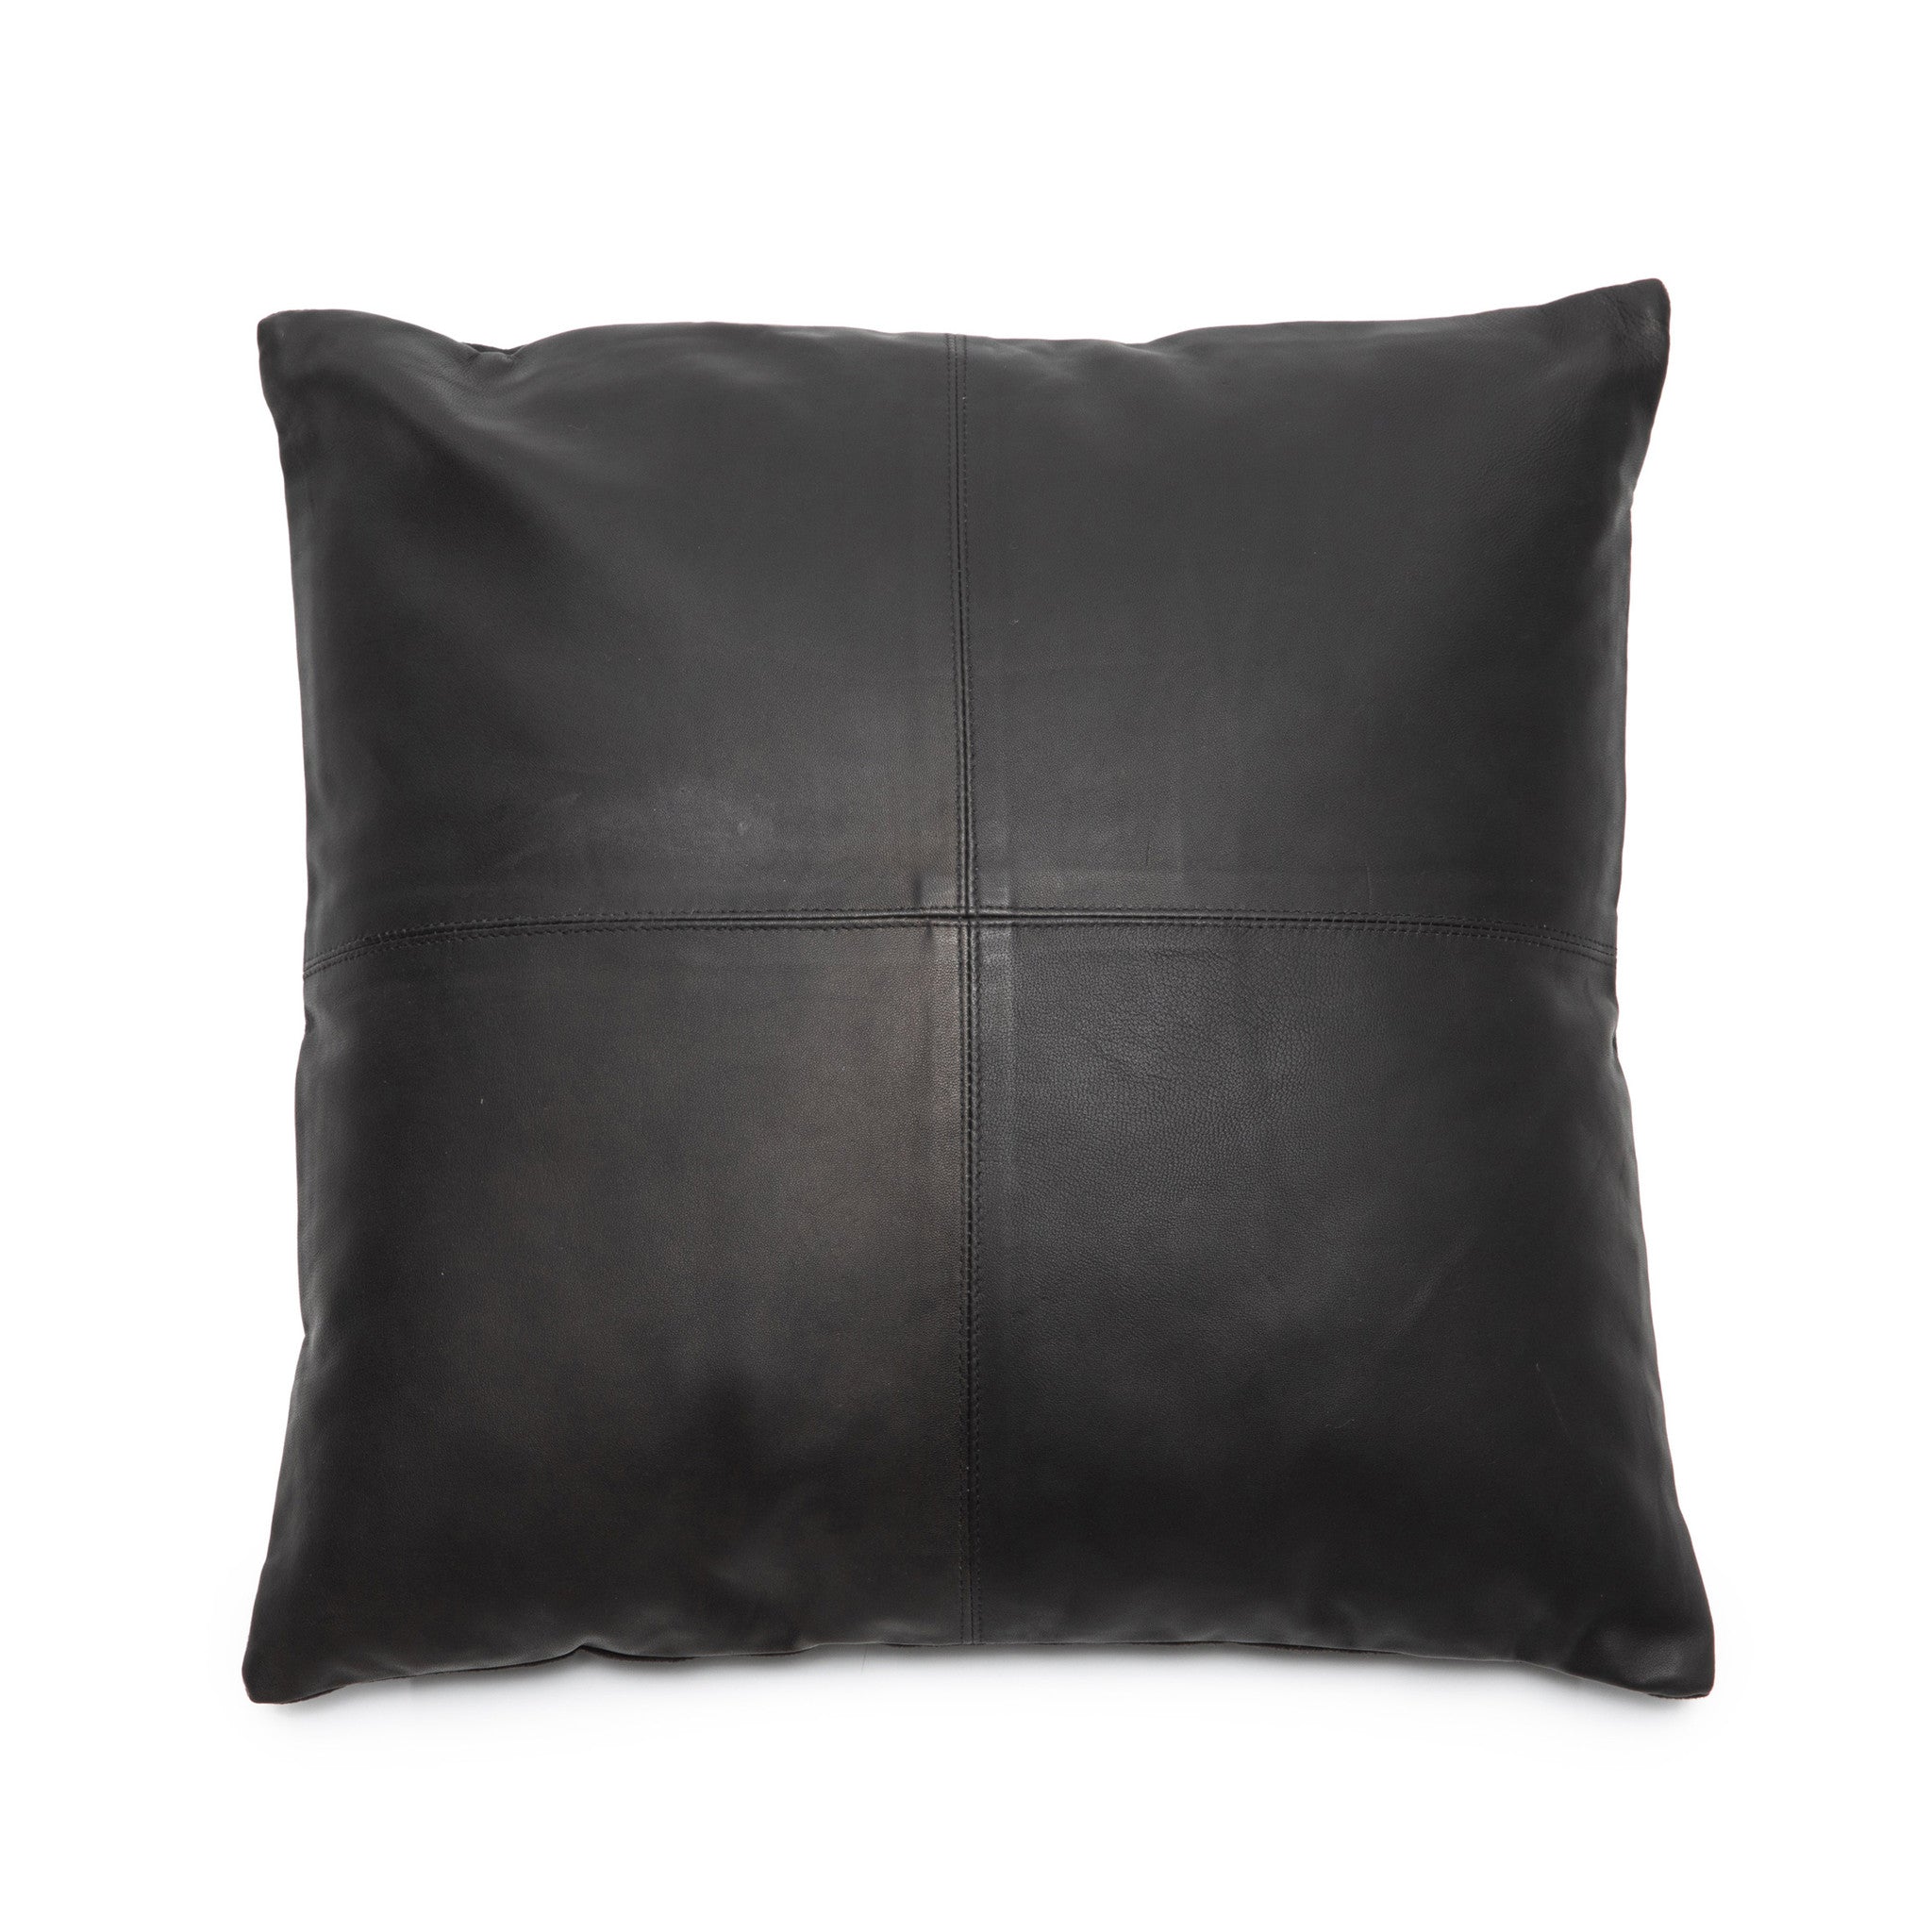 THE FOUR PANEL Leather Cushion Cover Black front view 40x40 cm